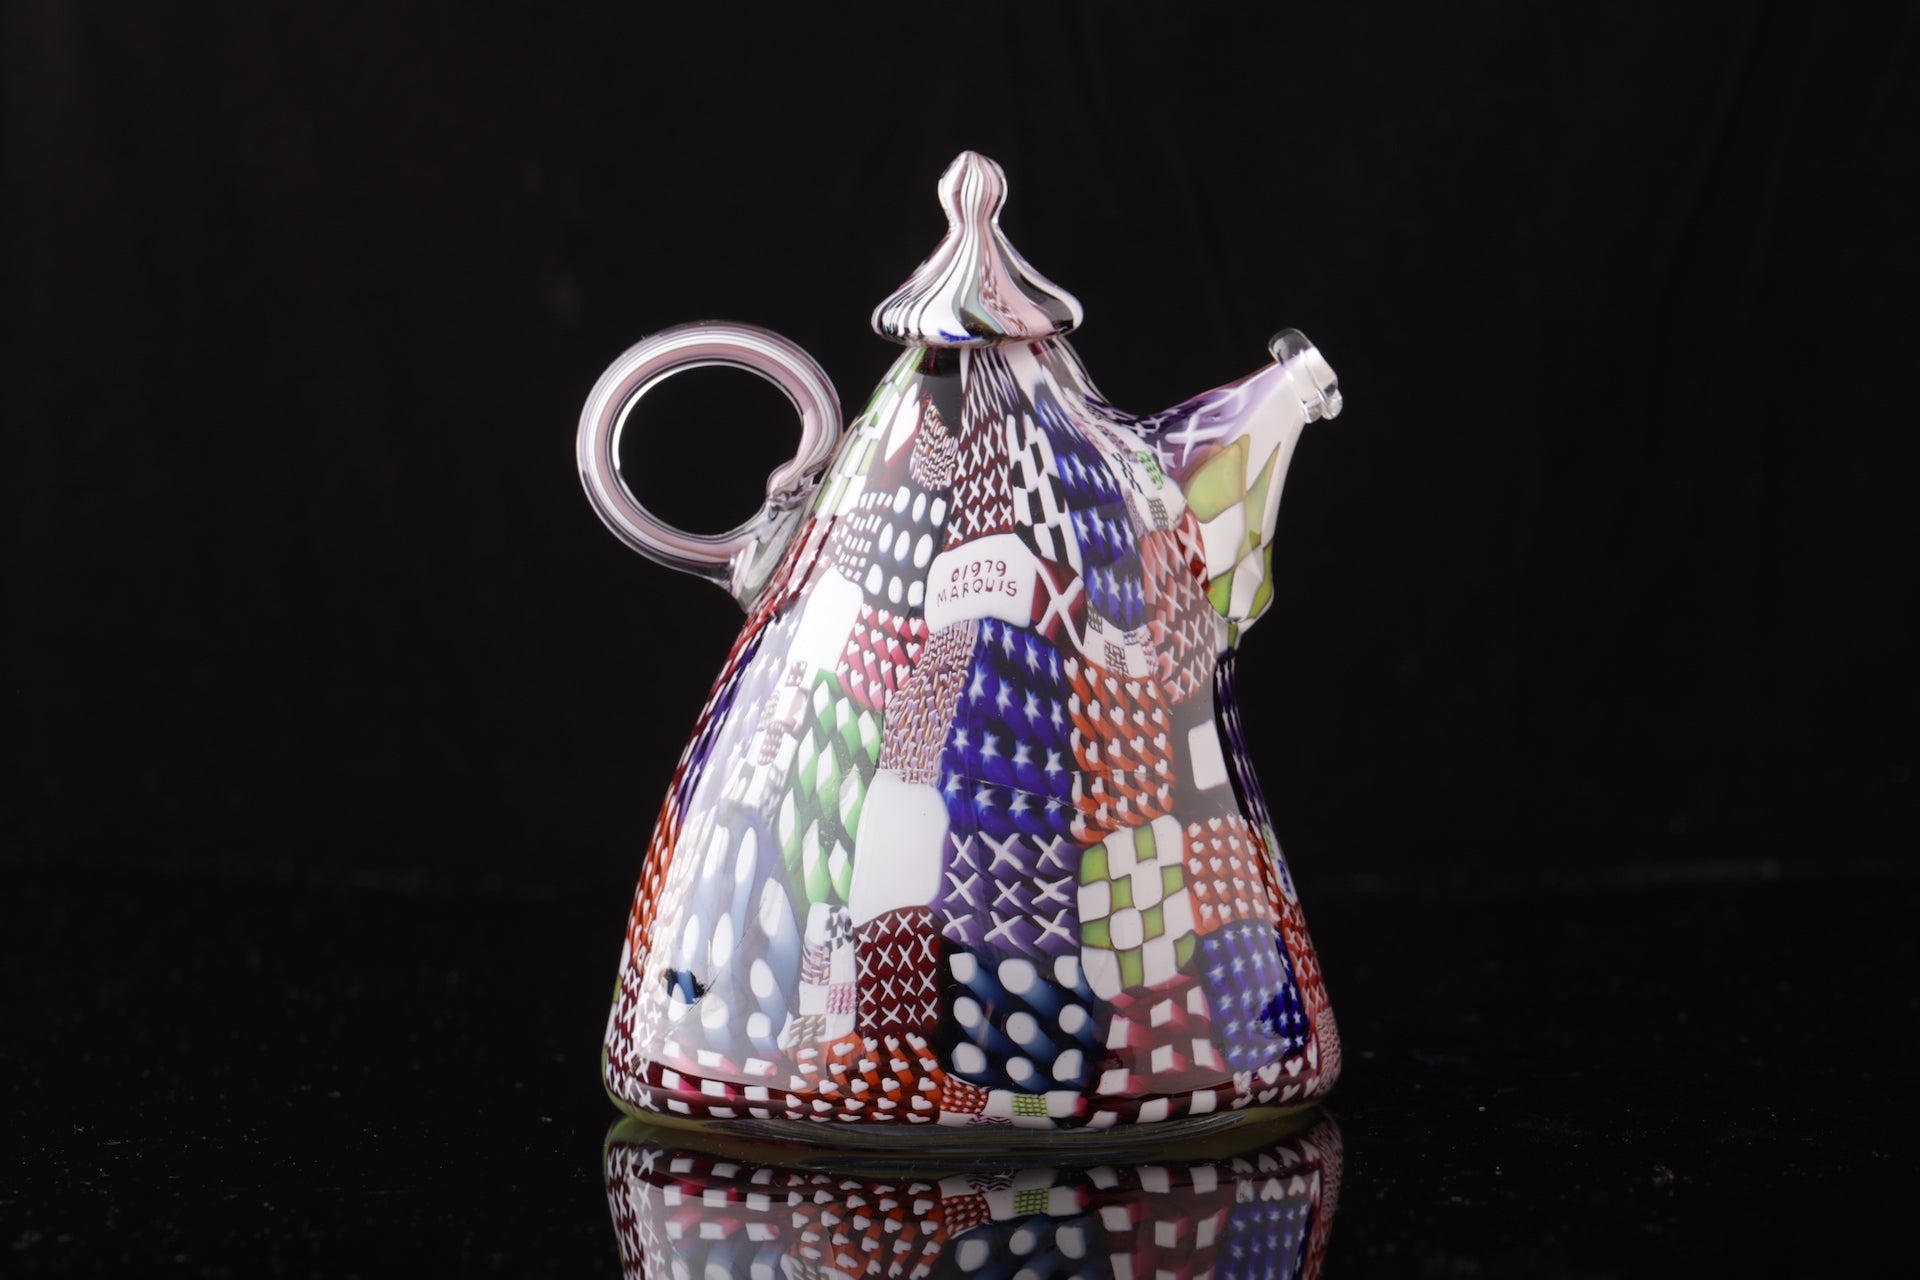 Crazy Quilt Coffee Pot (1979) by Richard Marquis. Photo by Tiffany Smith; Courtesy of R & Company